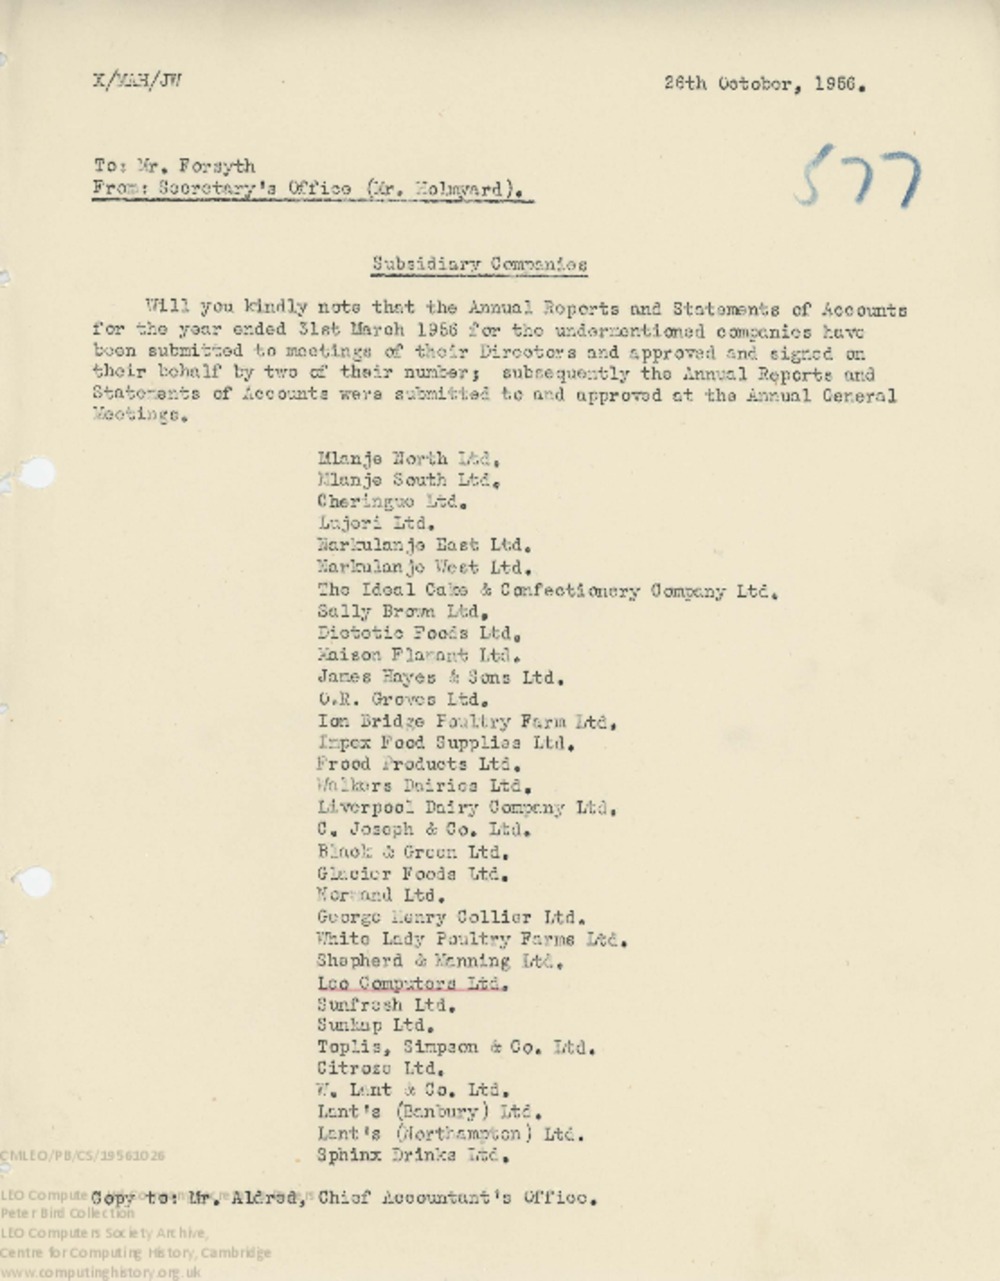 Article: 62448  Memo regarding Annual Reports and Accounts submitted for Lyons subsidiary company accounts, 26 Oct 1956